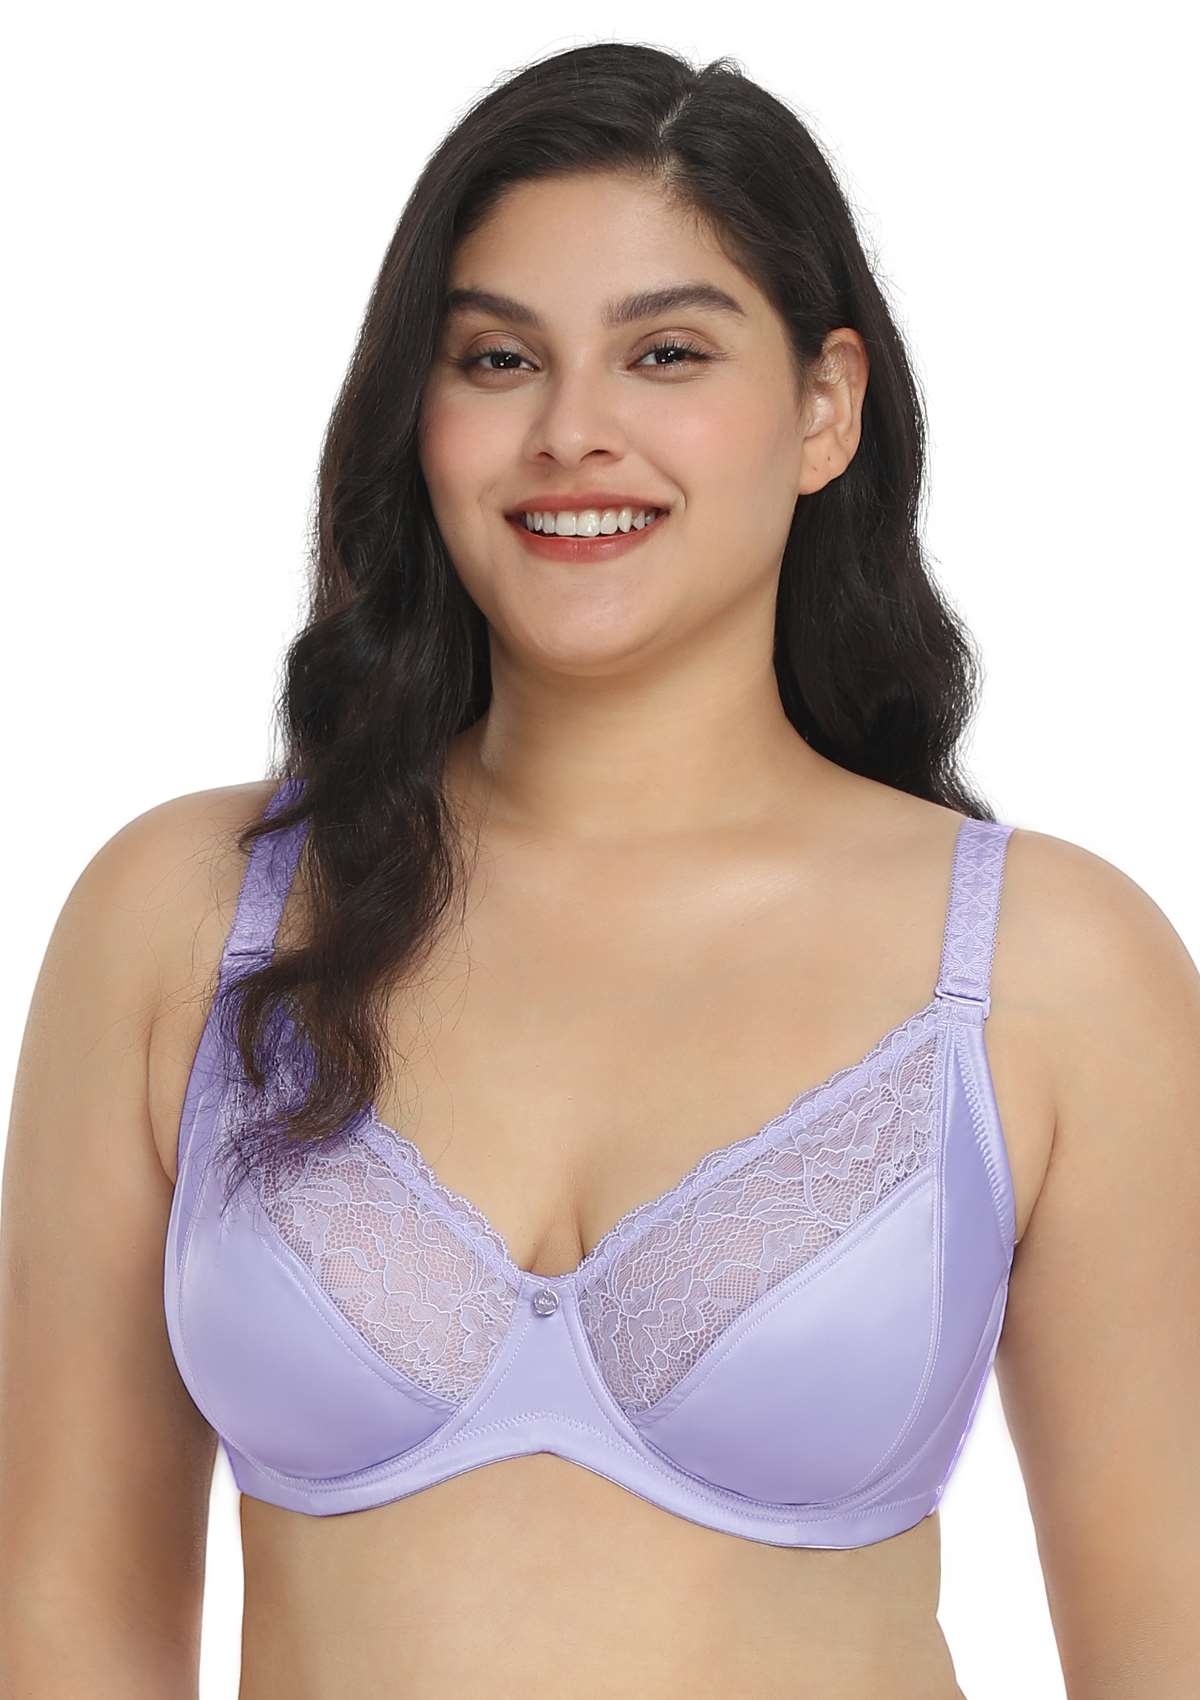 HSIA Foxy Satin Silky Full Coverage Underwire Bra With Floral Lace Trim - Champagne / 42 / C